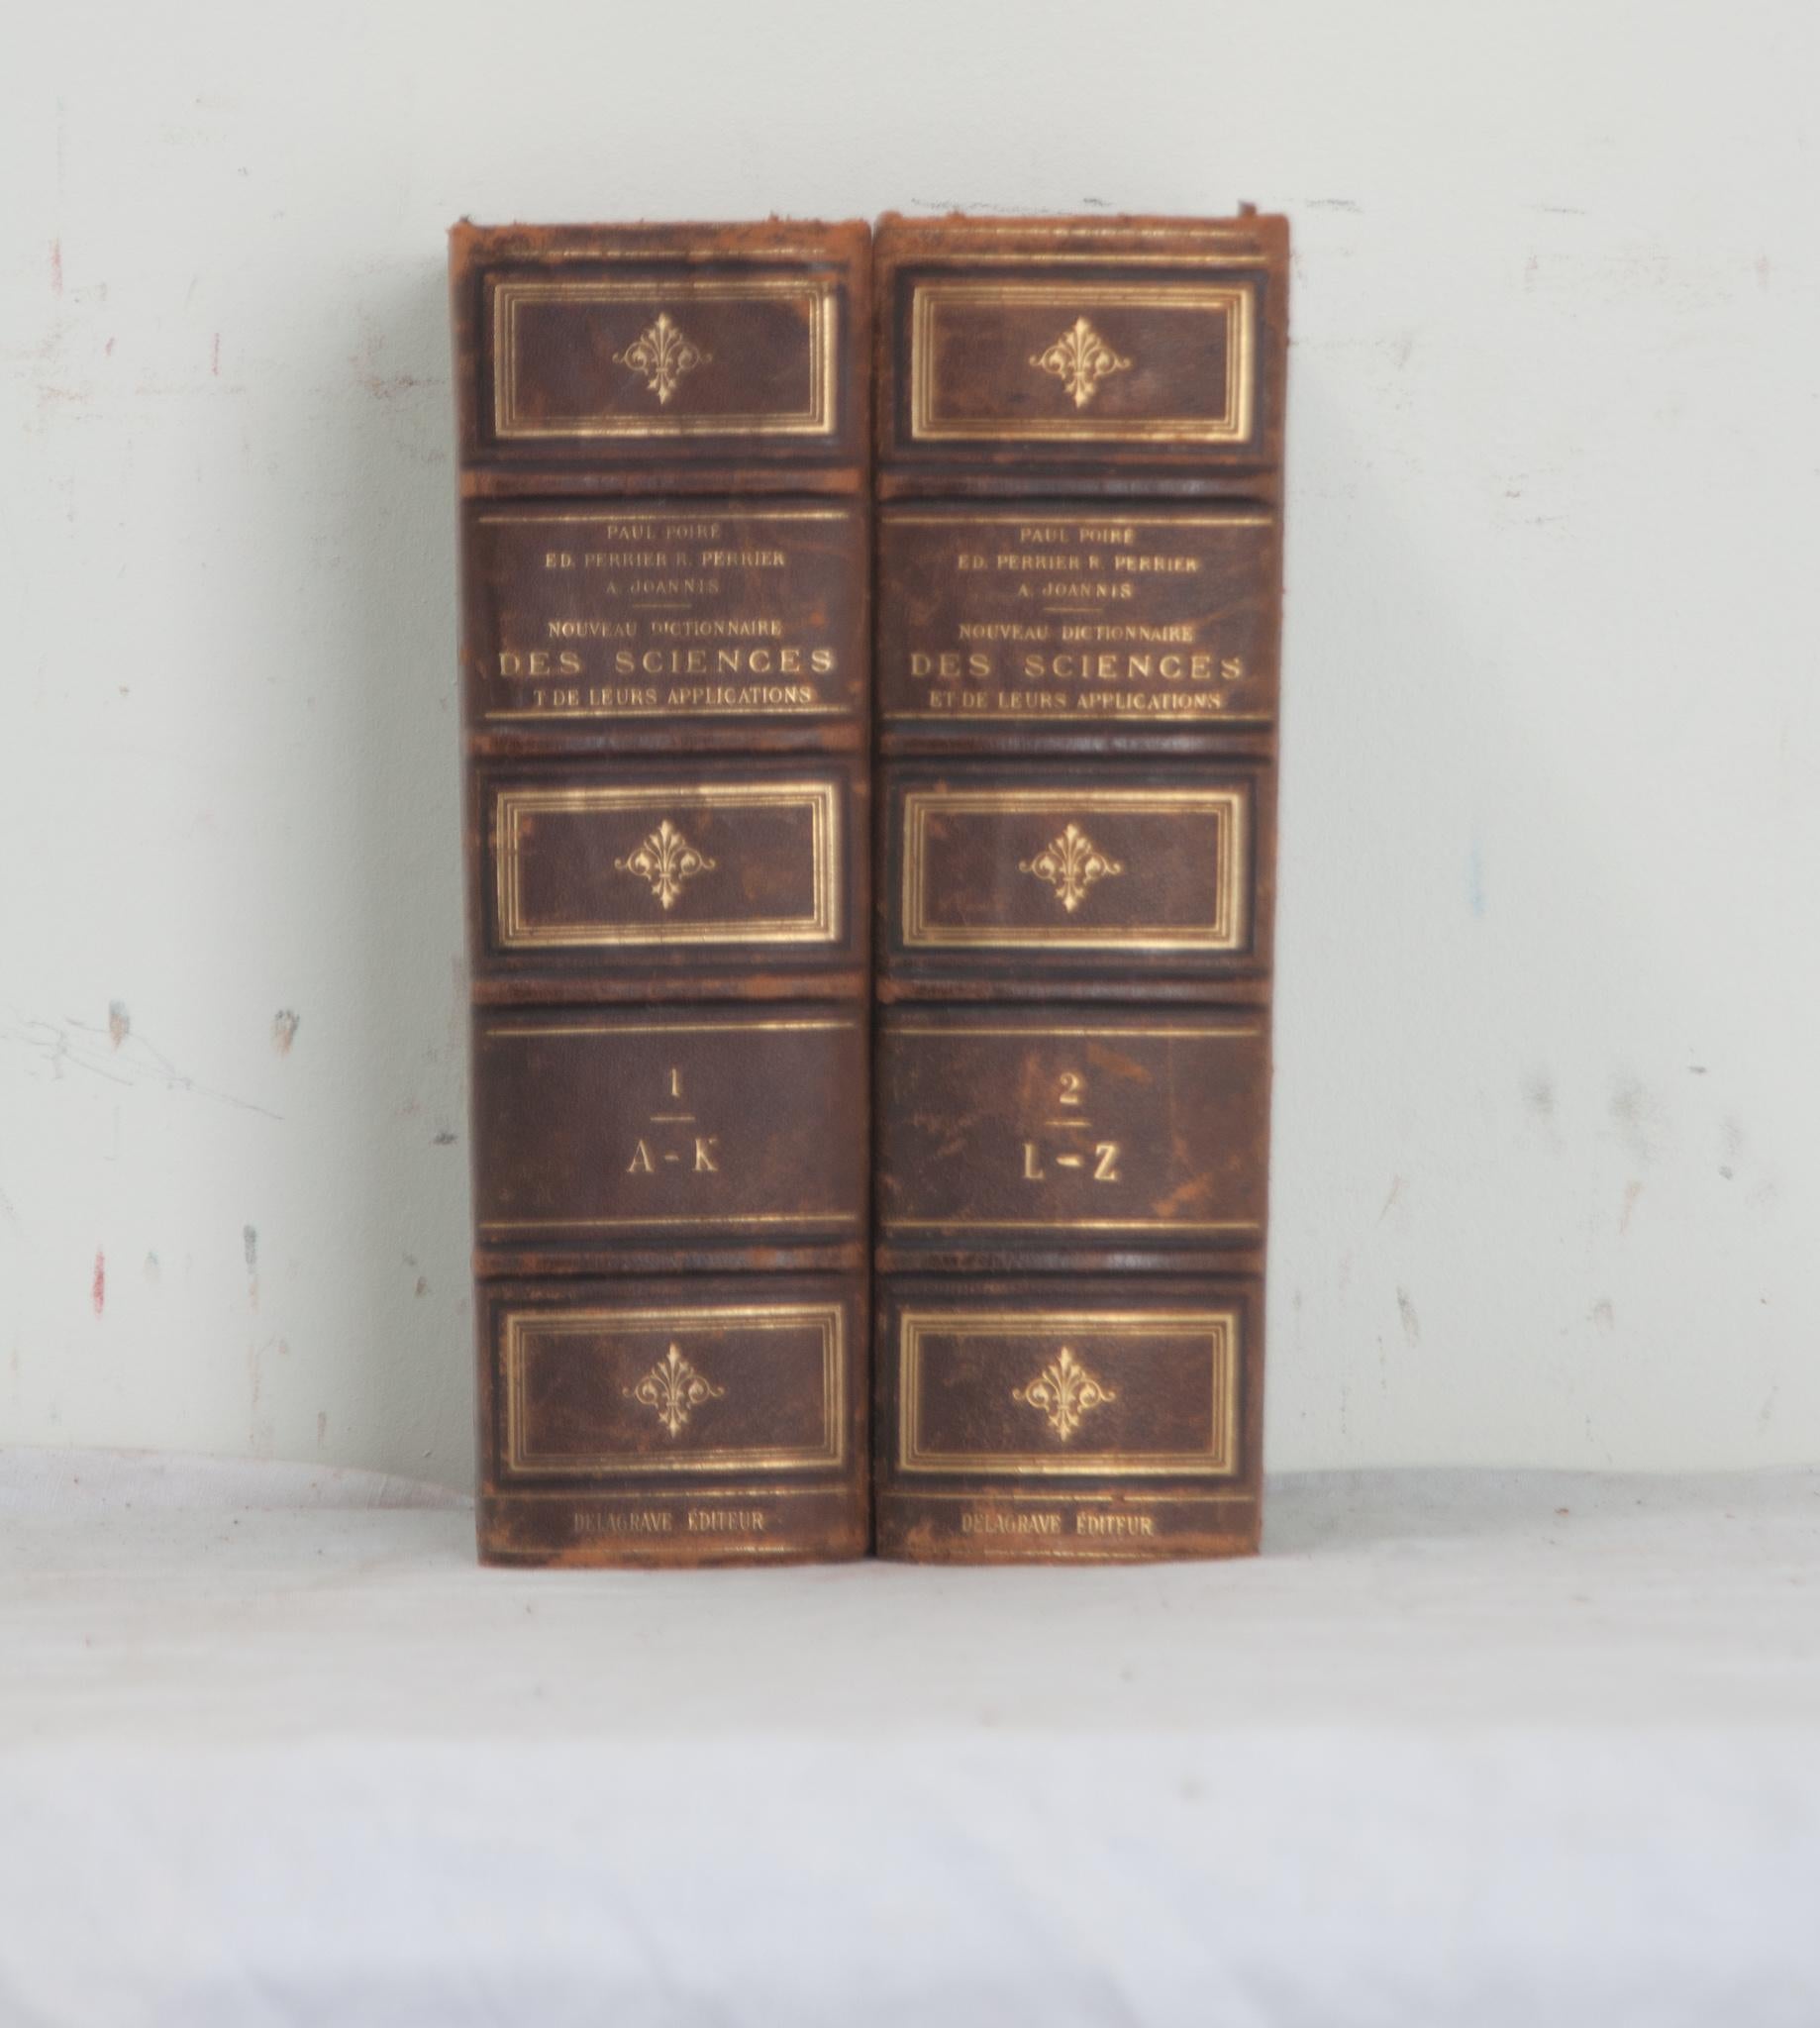 A French pair of Nouveau Dictionnaire Des Sciences books by Paul Poiré. The collection of books is leather bound with gold lettering stating the author, title, and respective volume. Written in 1888, the set is a science dictionary with terms and